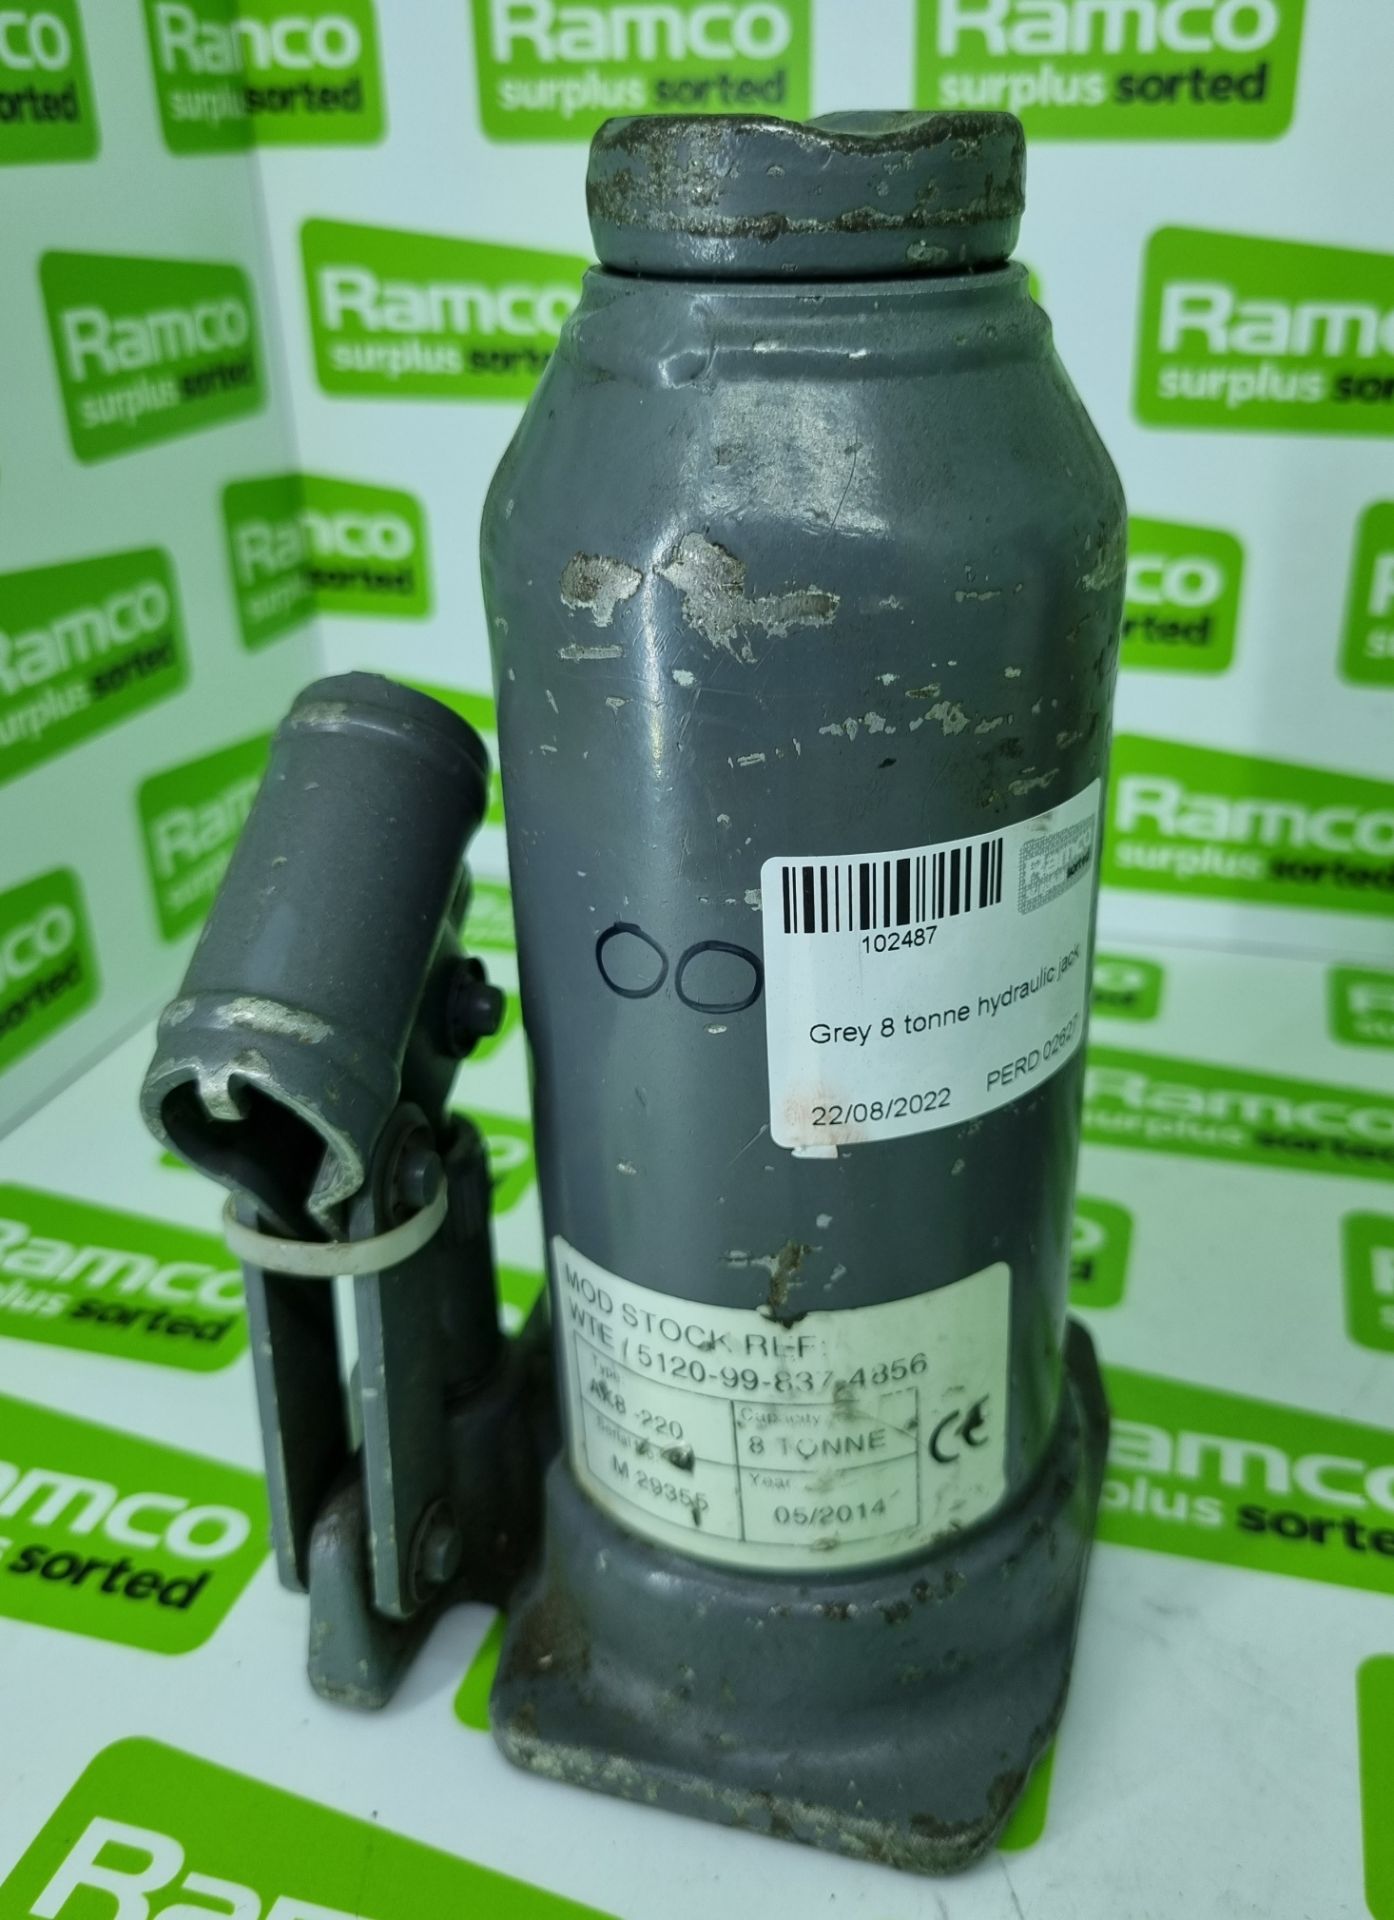 Grey 8 tonne hydraulic jack, Grey 8 tonne hydraulic jack - Image 3 of 3